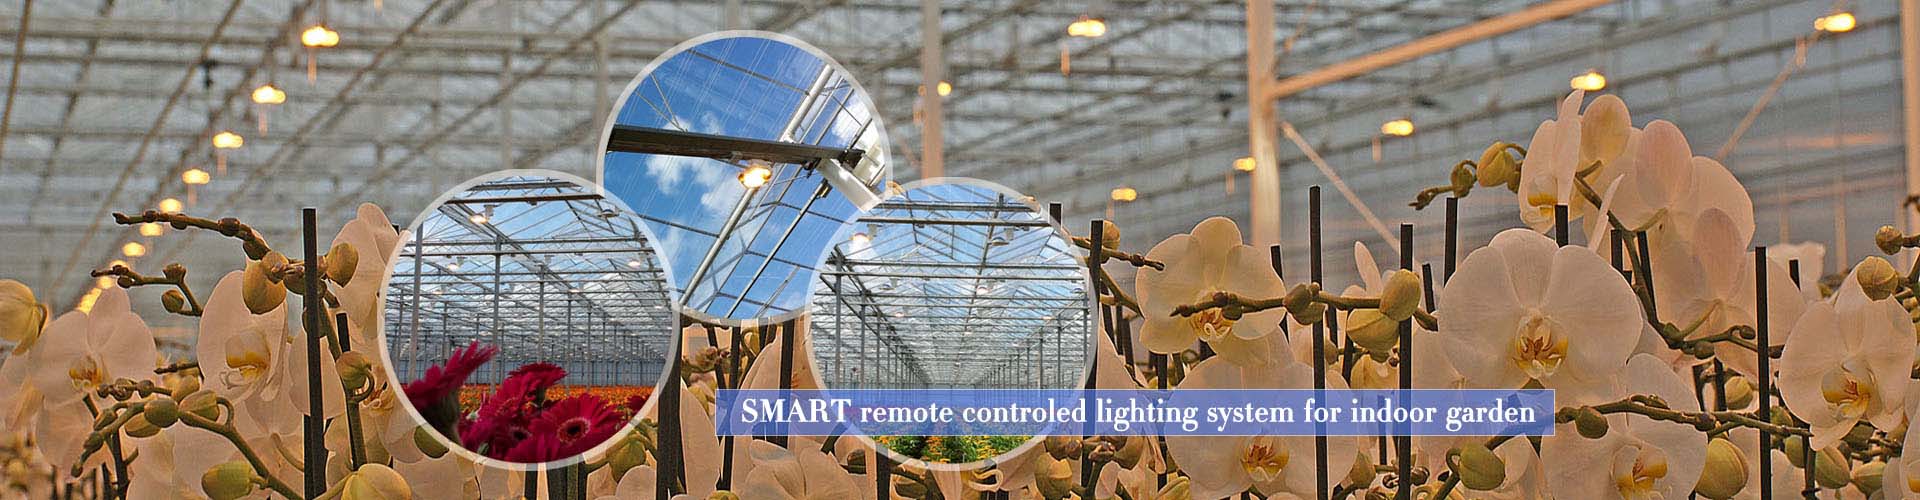 smart remote controled lighting system